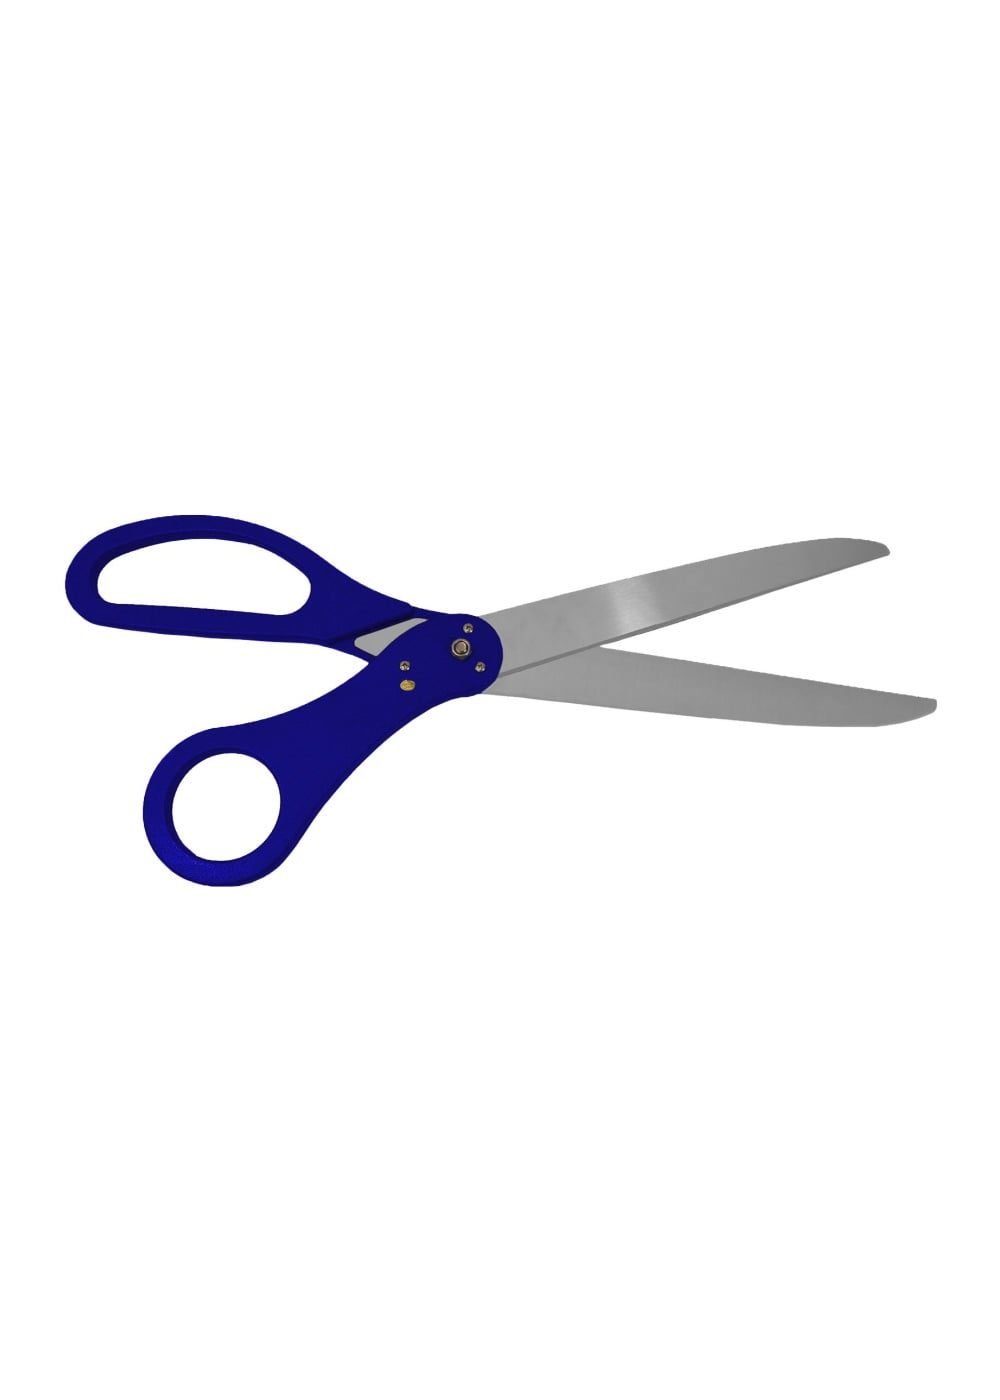 25" Ceremony Ribbon Cutting Scissors by Allures Illusions for sale online 